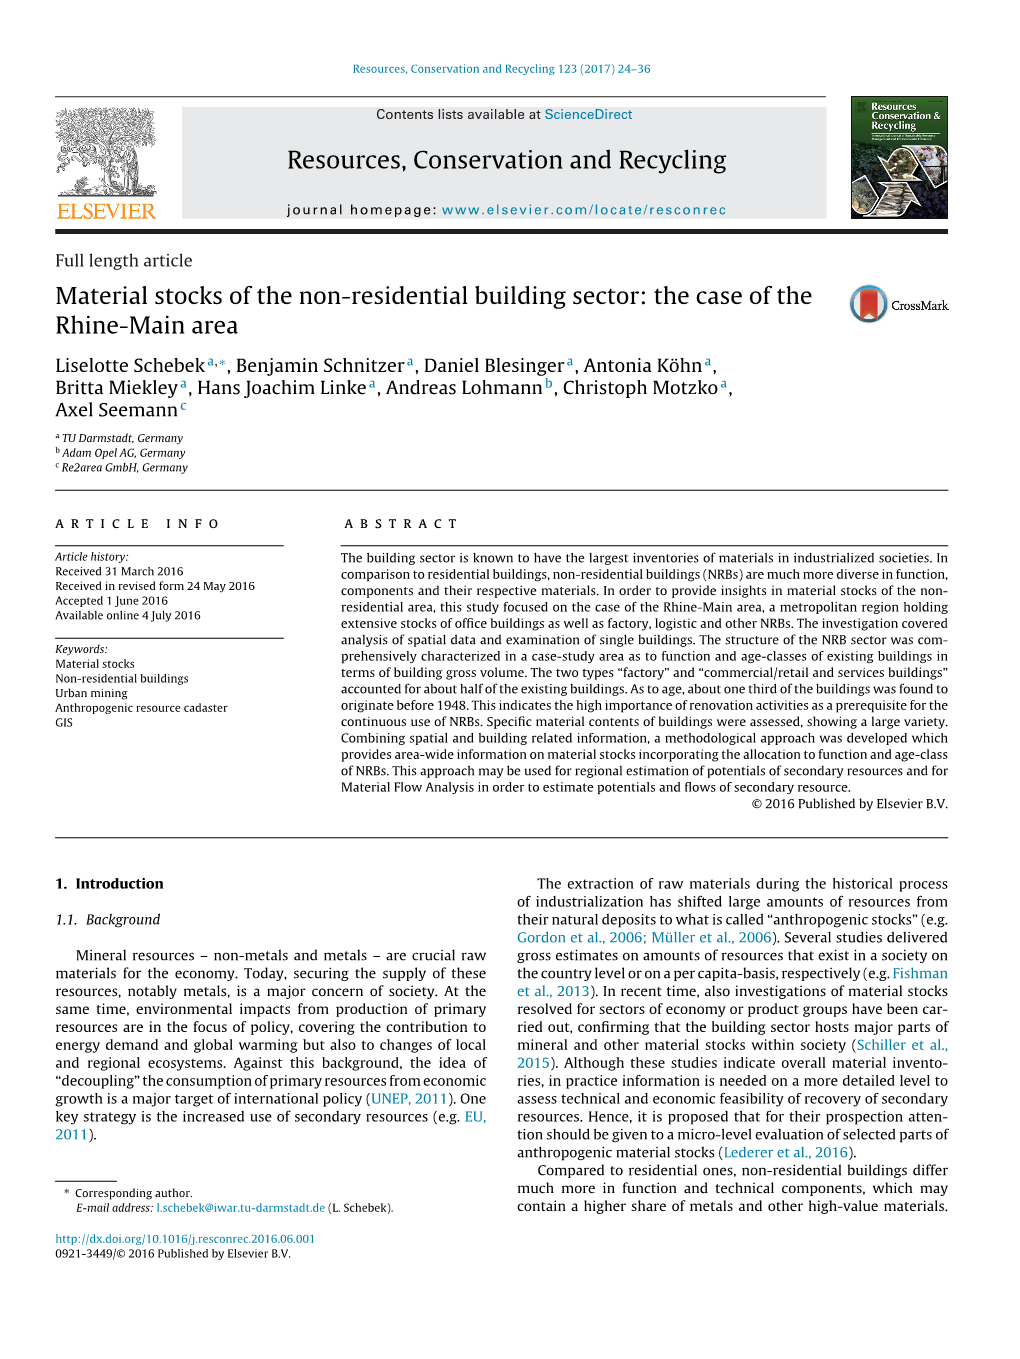 Material Stocks of the Non-Residential Building Sector: the Case of The